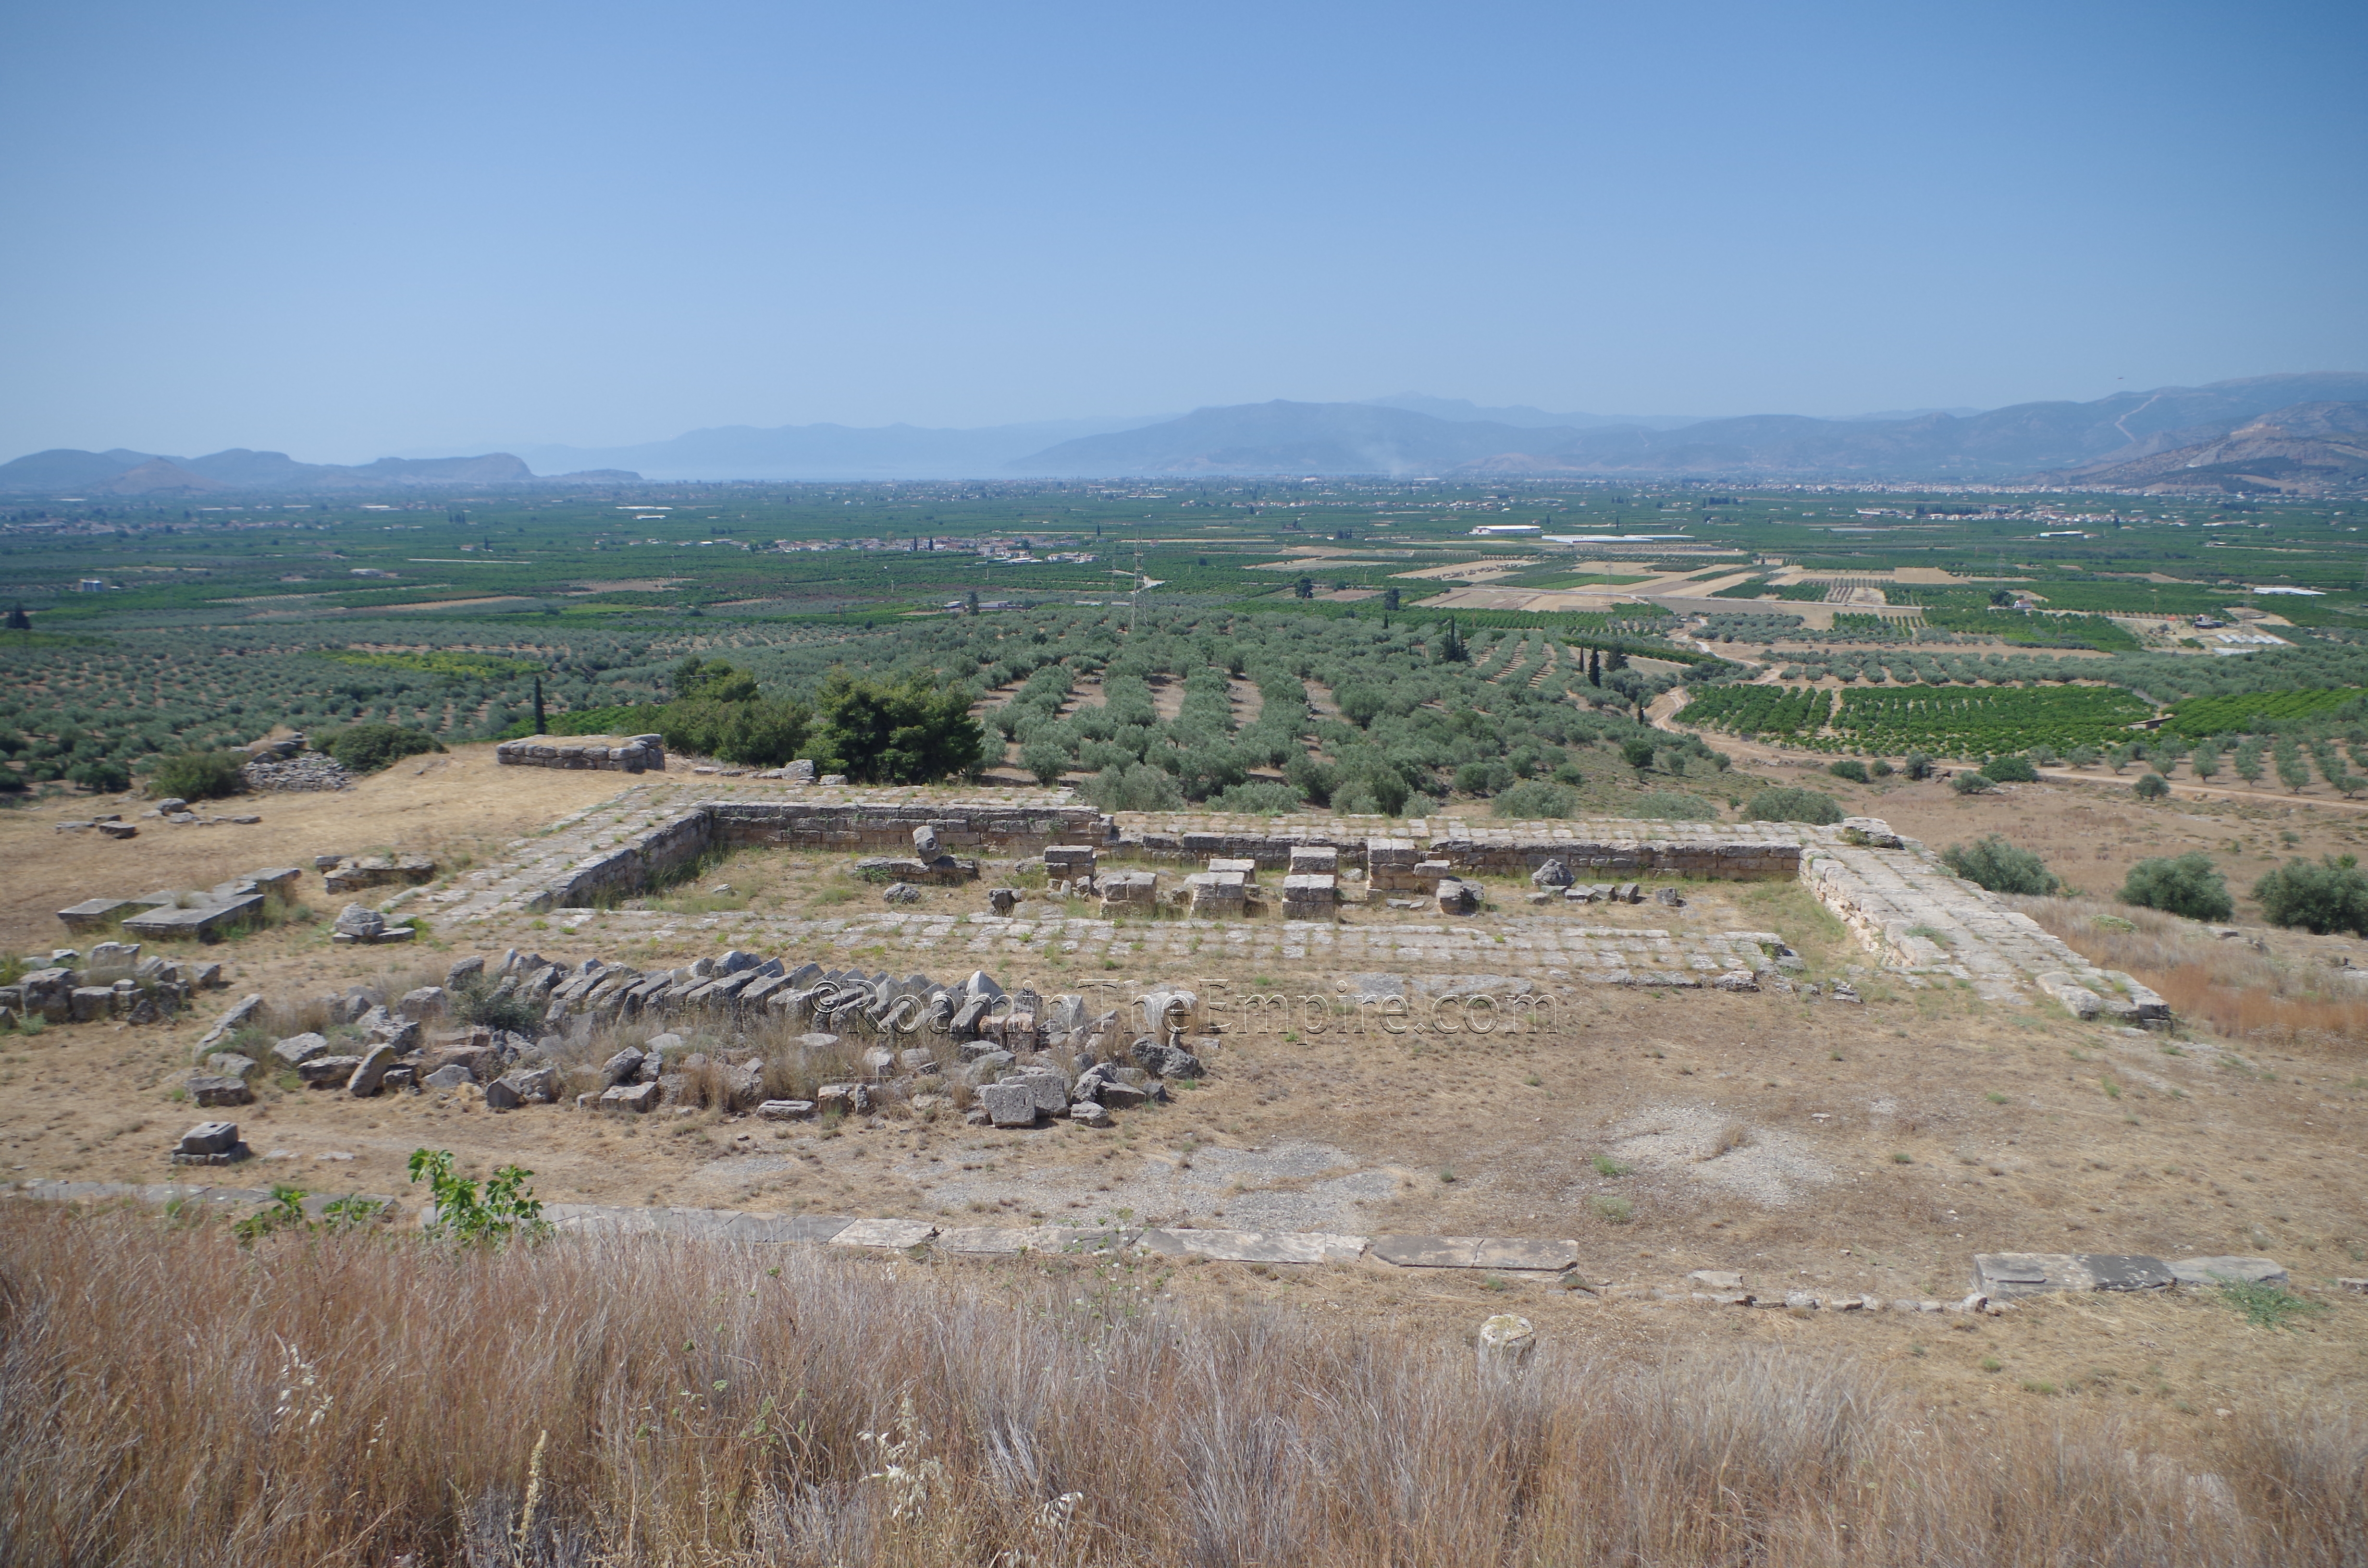 Second temple (5th century BCE) at the Heraion of Argos.